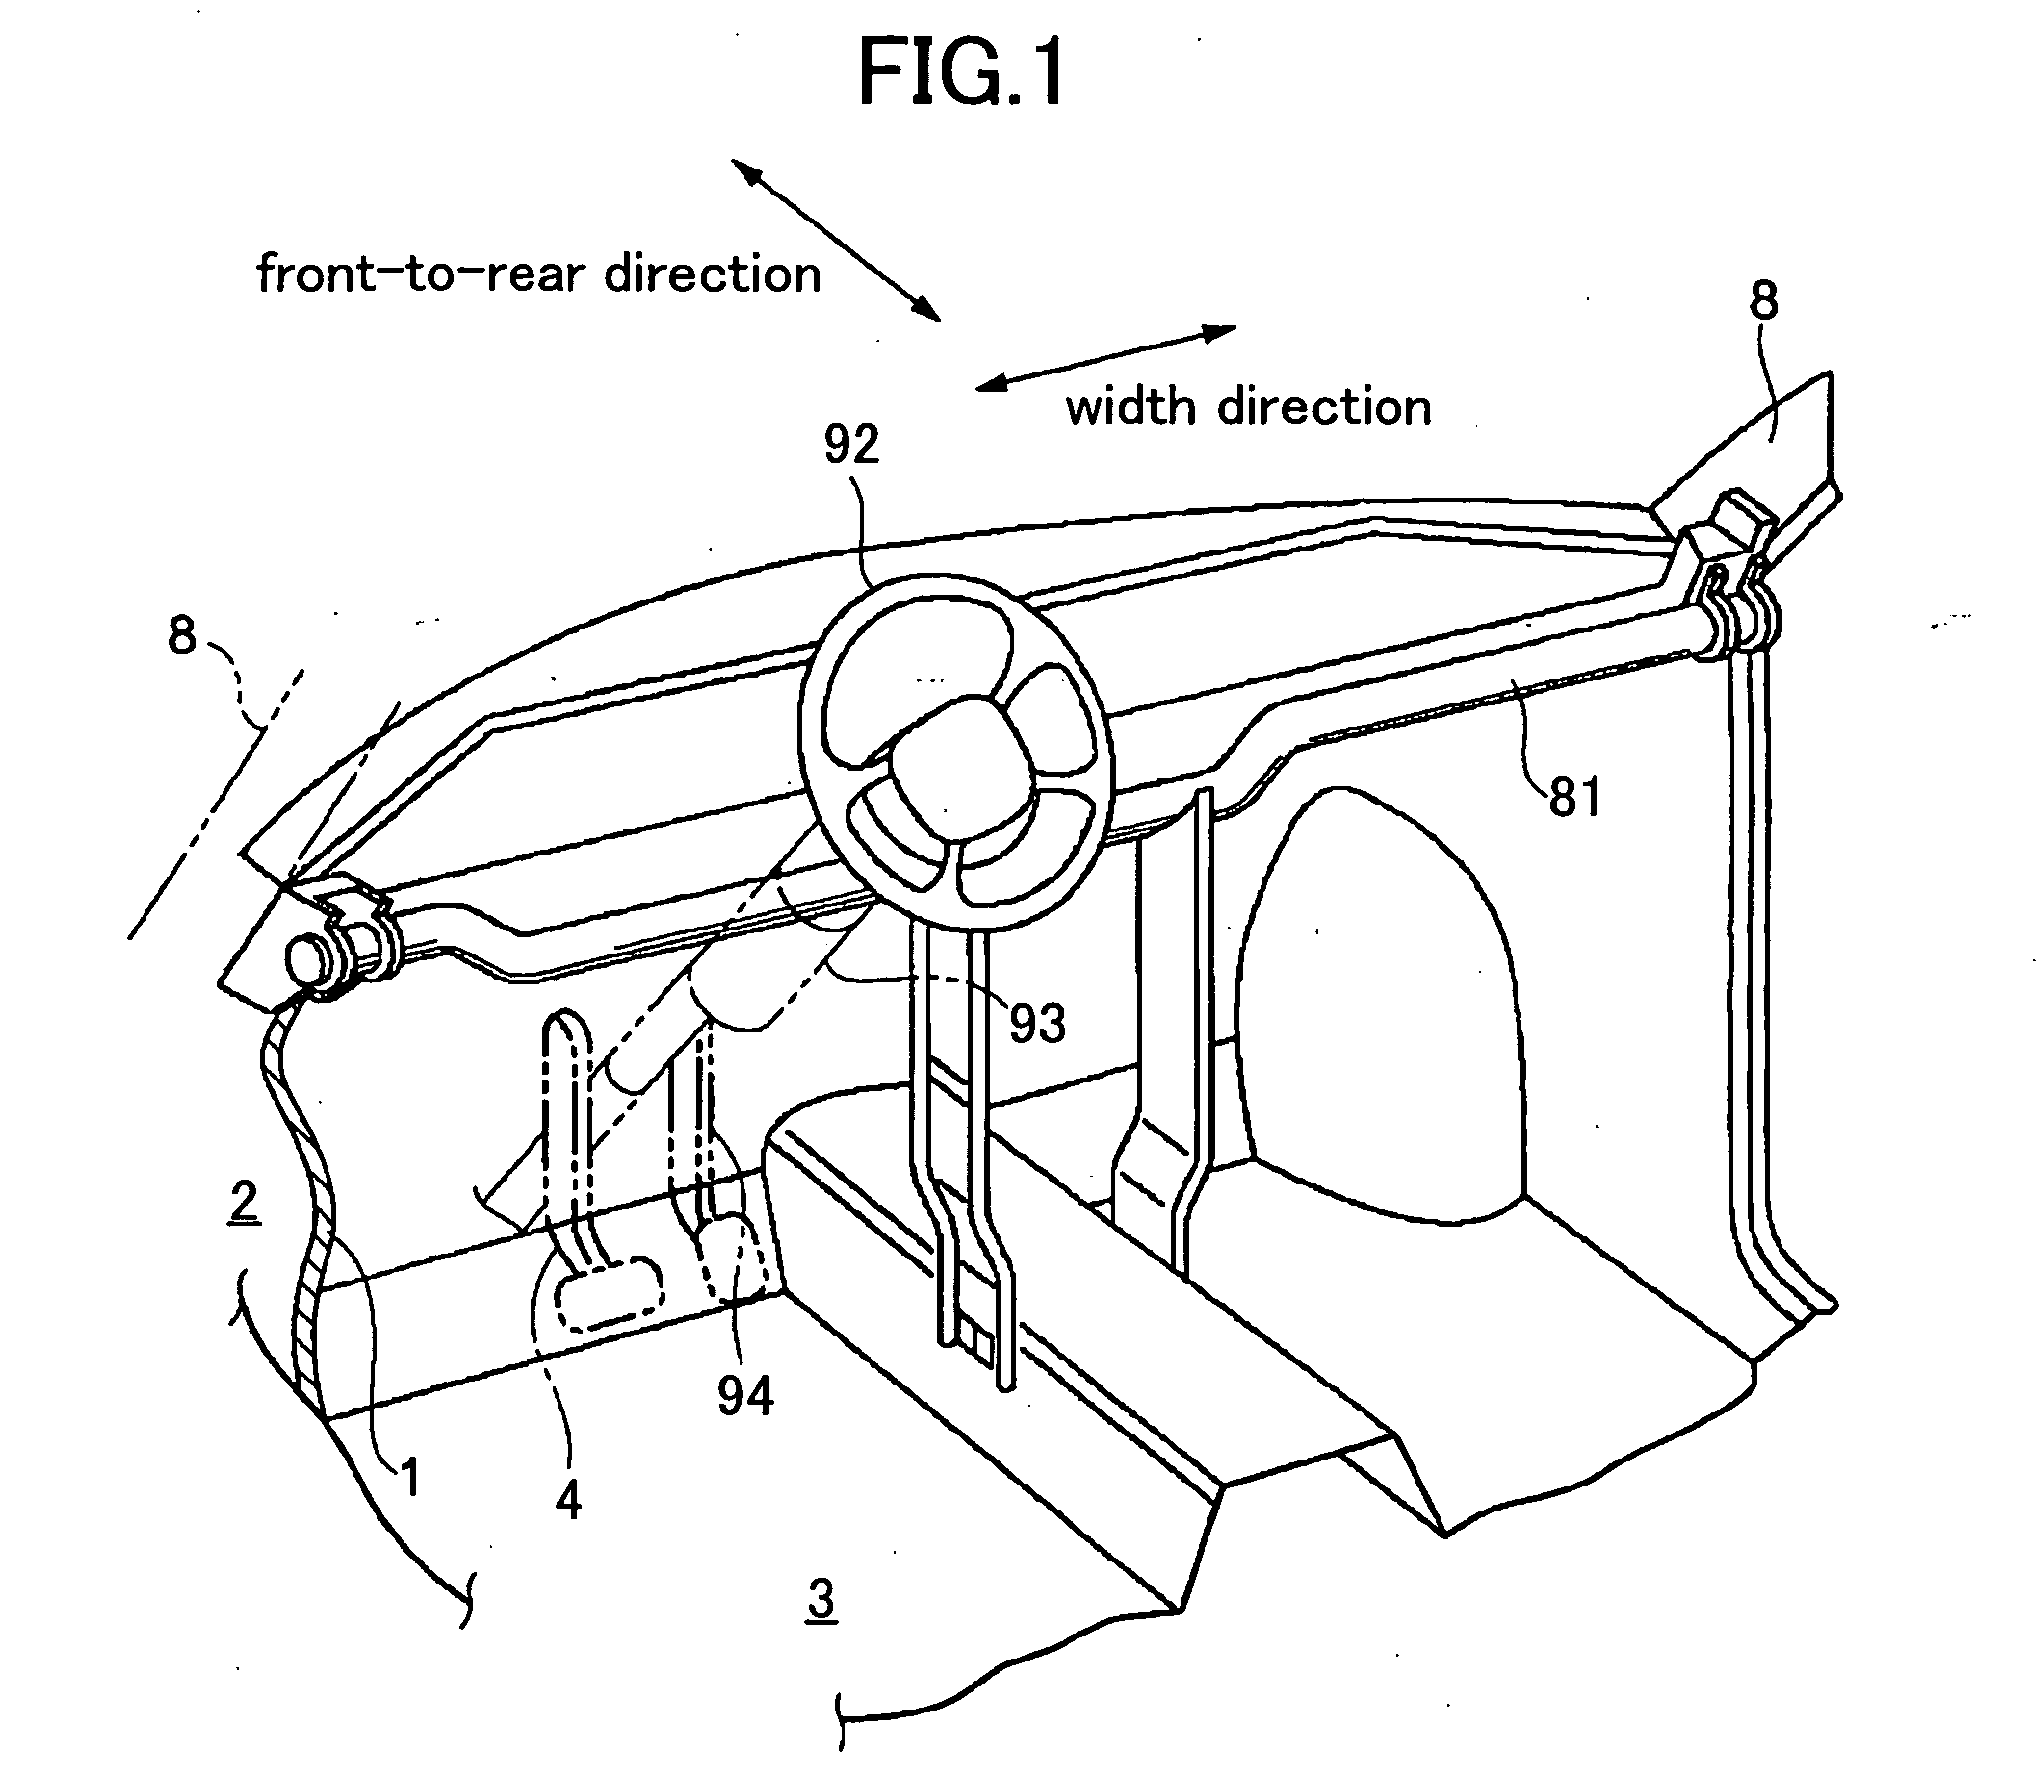 Pedal assembly support structure for vehicle